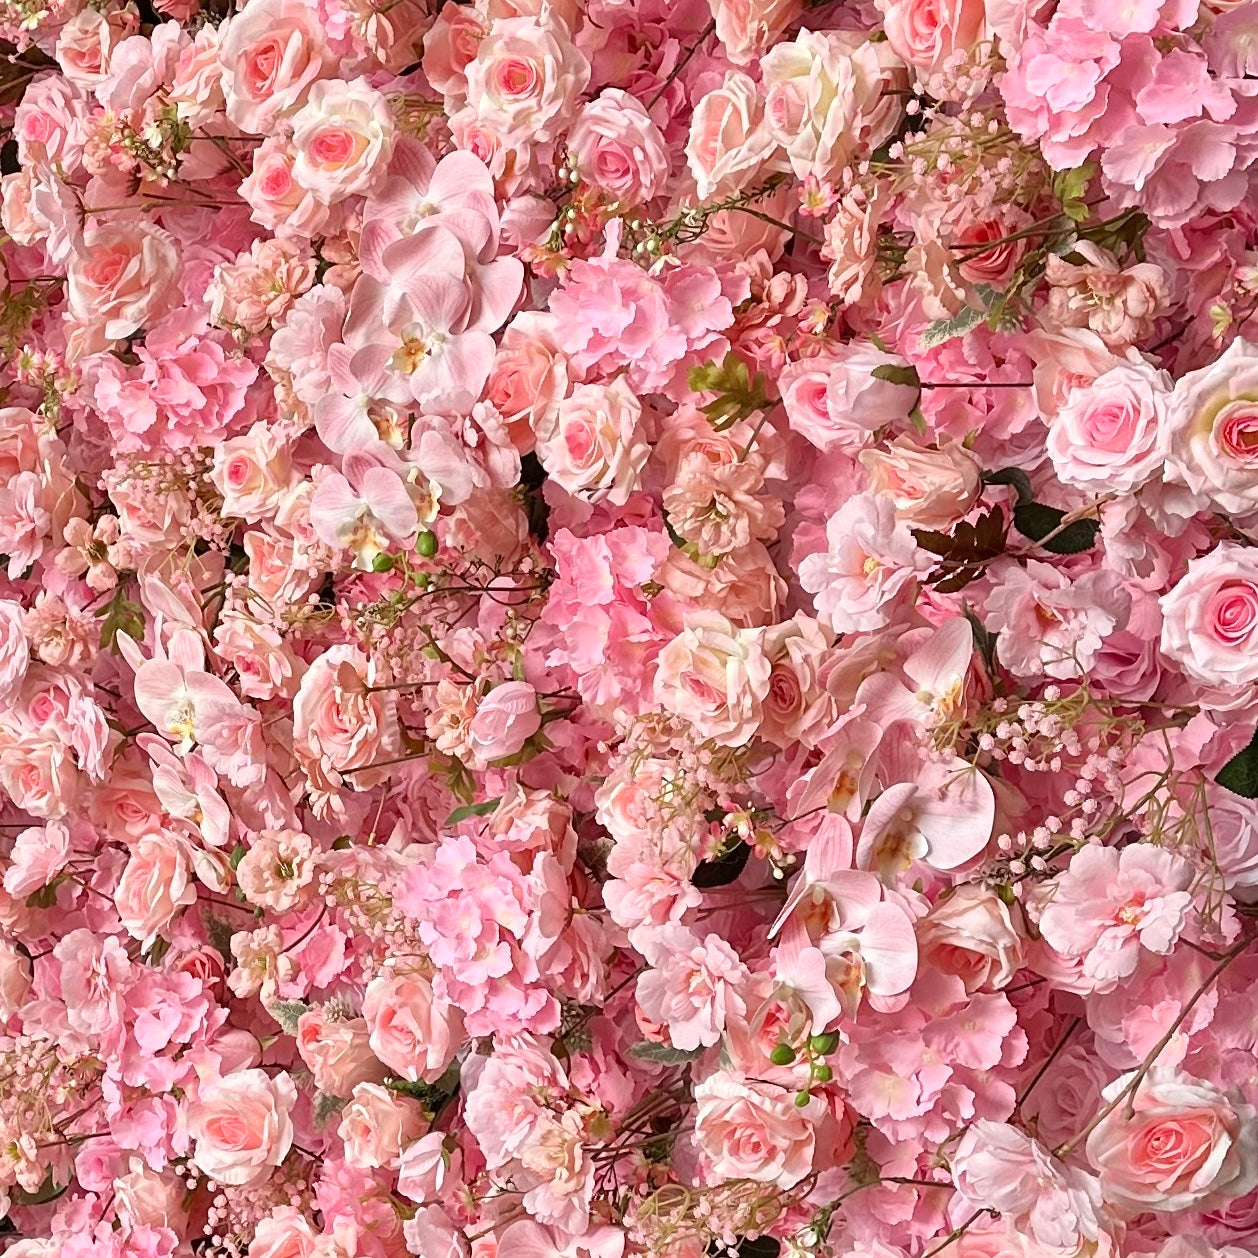 The 5D pink fabric flower wall looks vivid and lifelike.